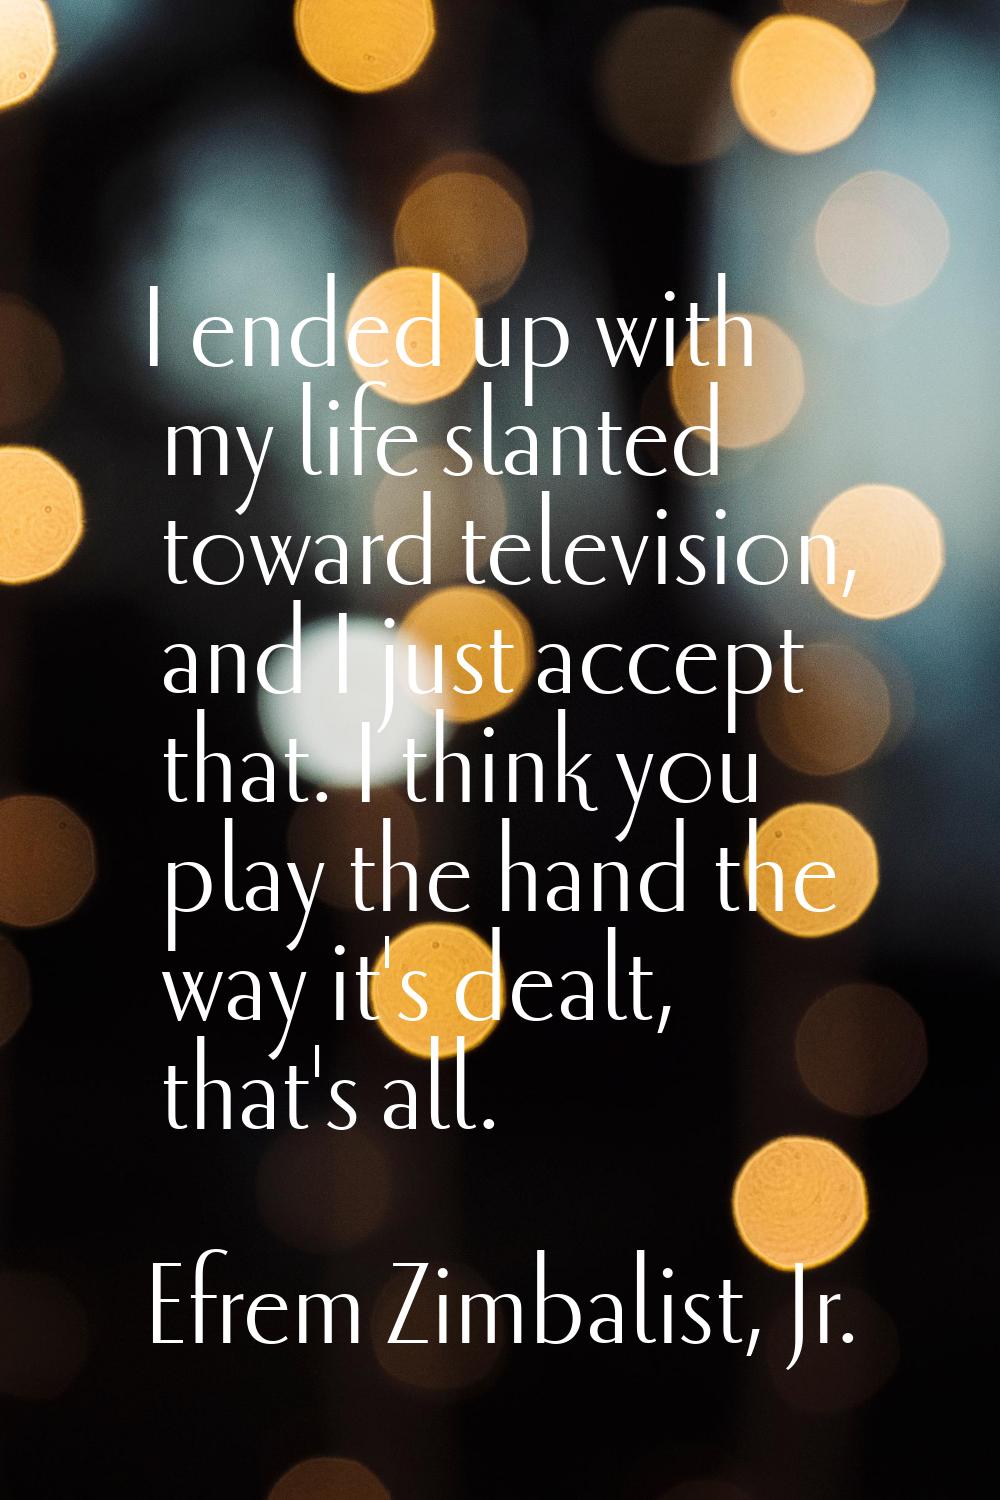 I ended up with my life slanted toward television, and I just accept that. I think you play the han